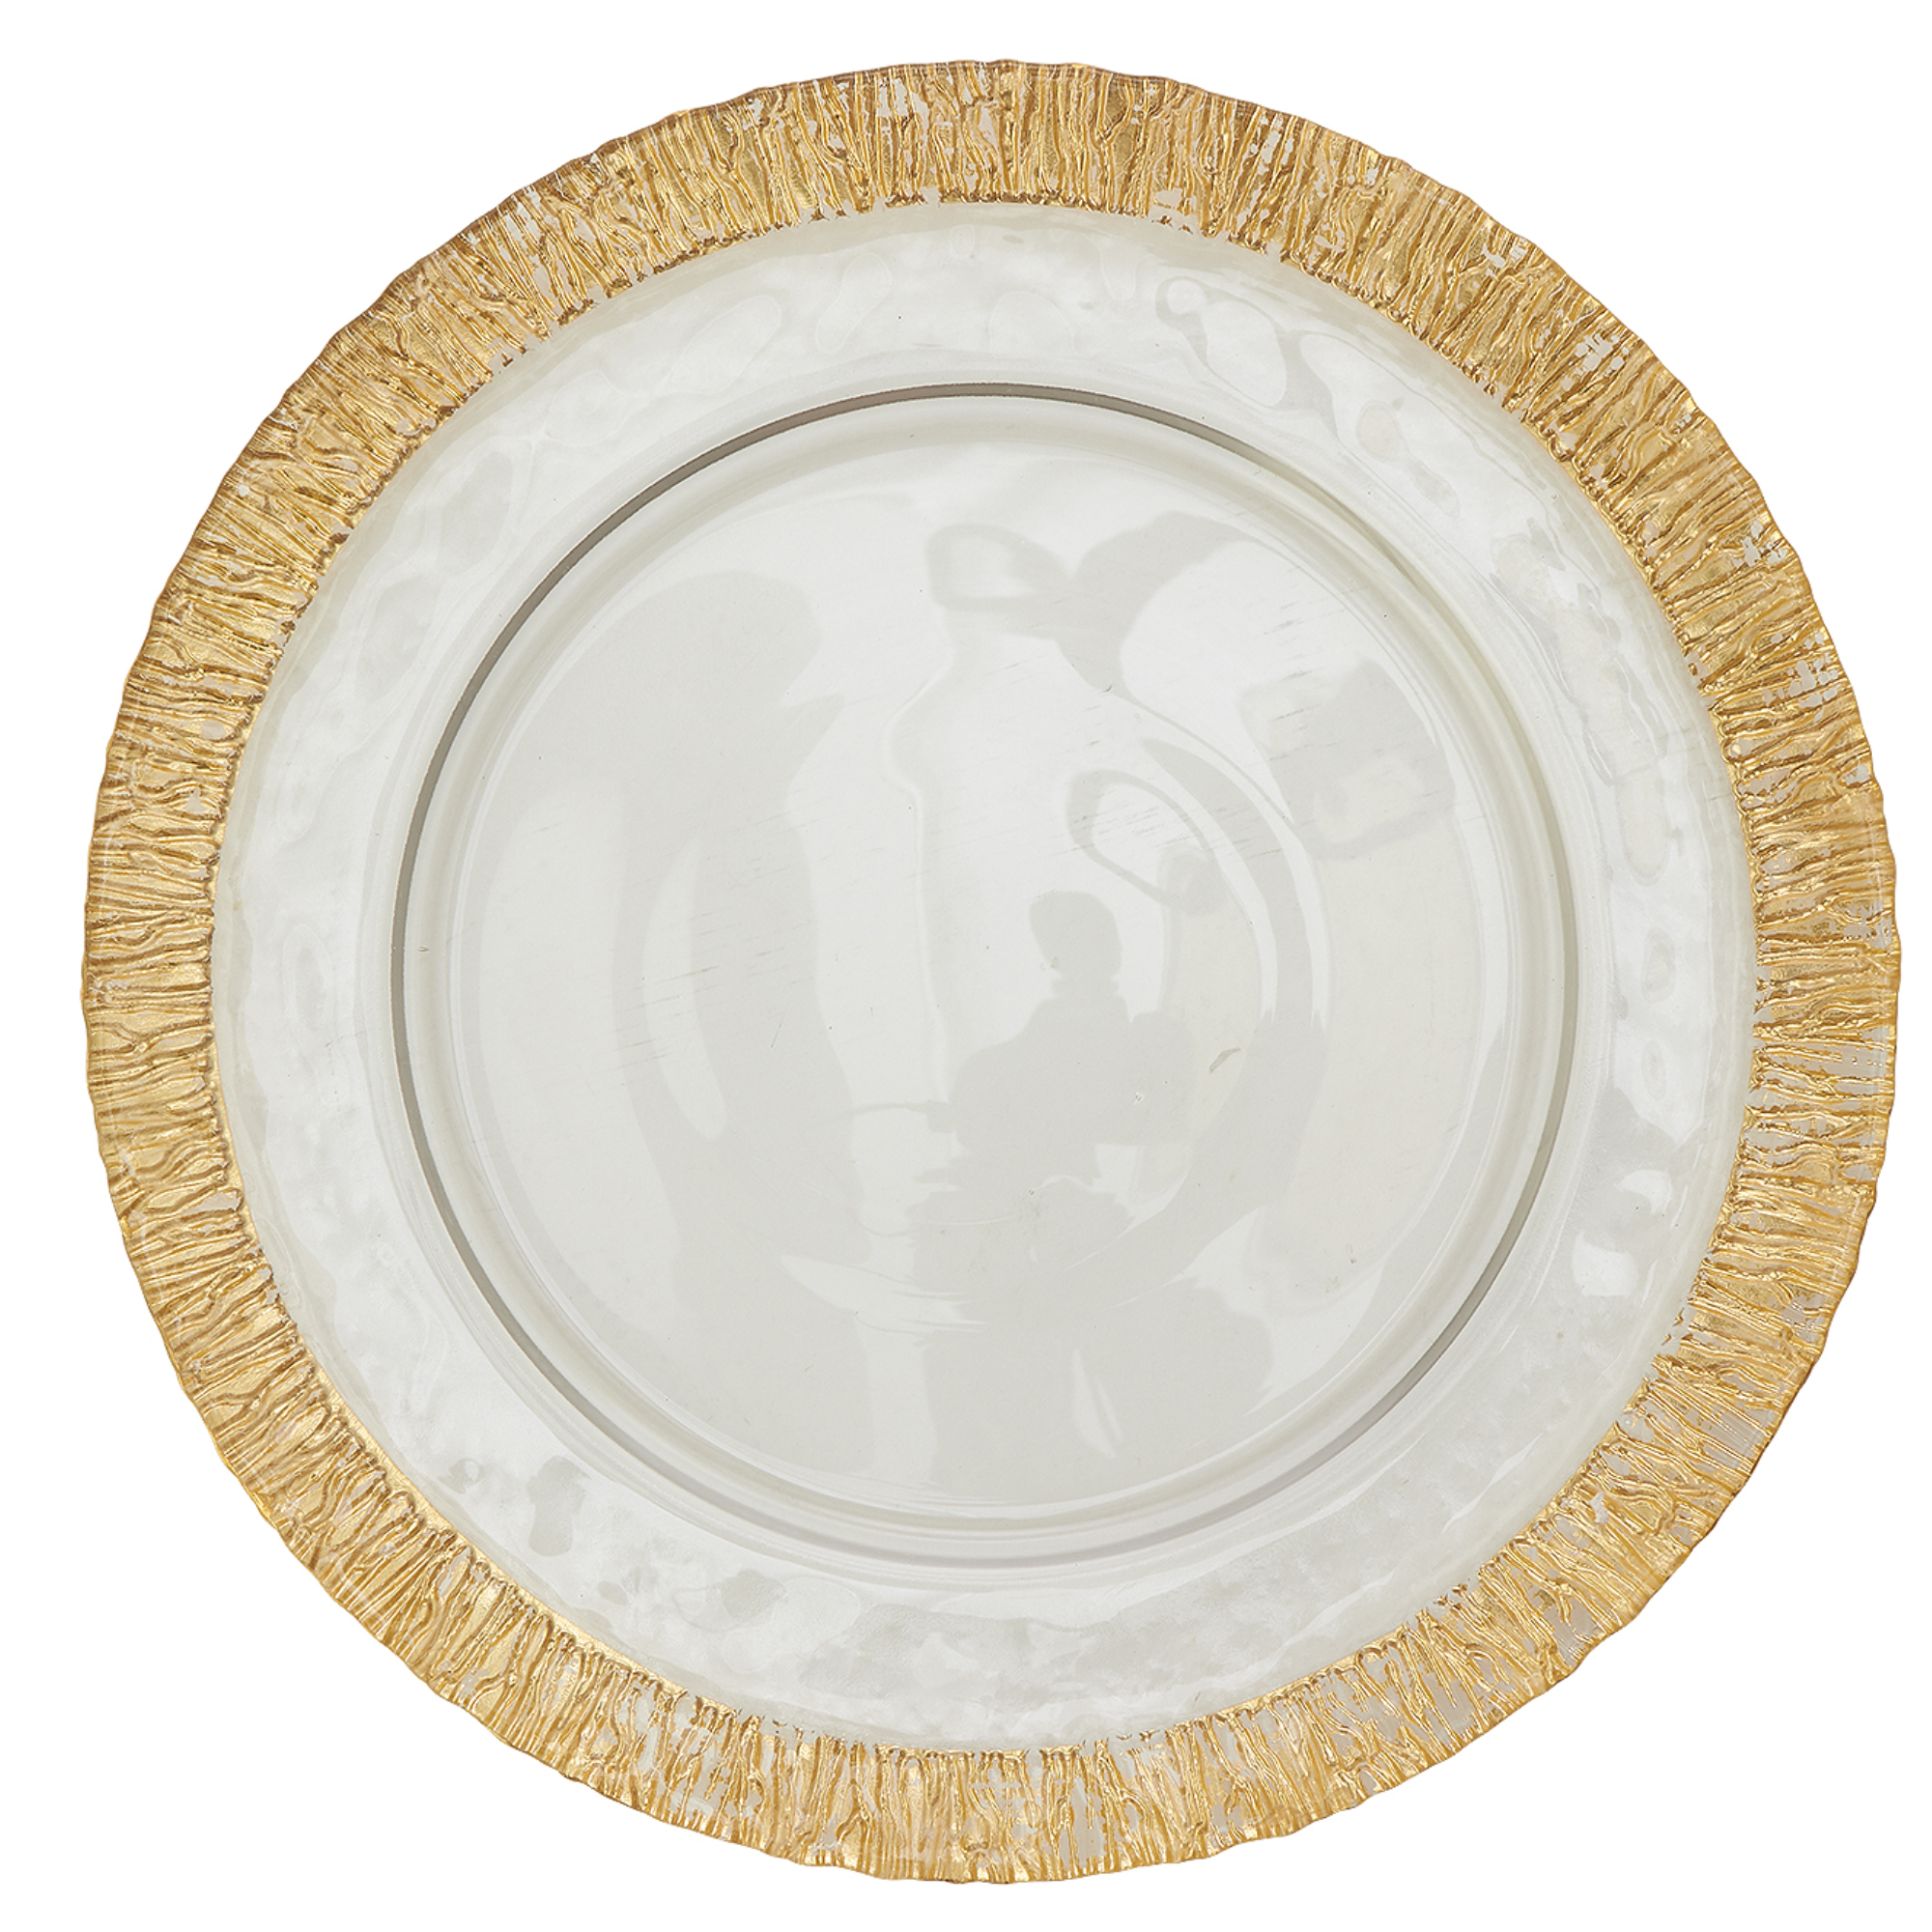 Wood Grain Edge Glass Charger Plate 13" - Gold